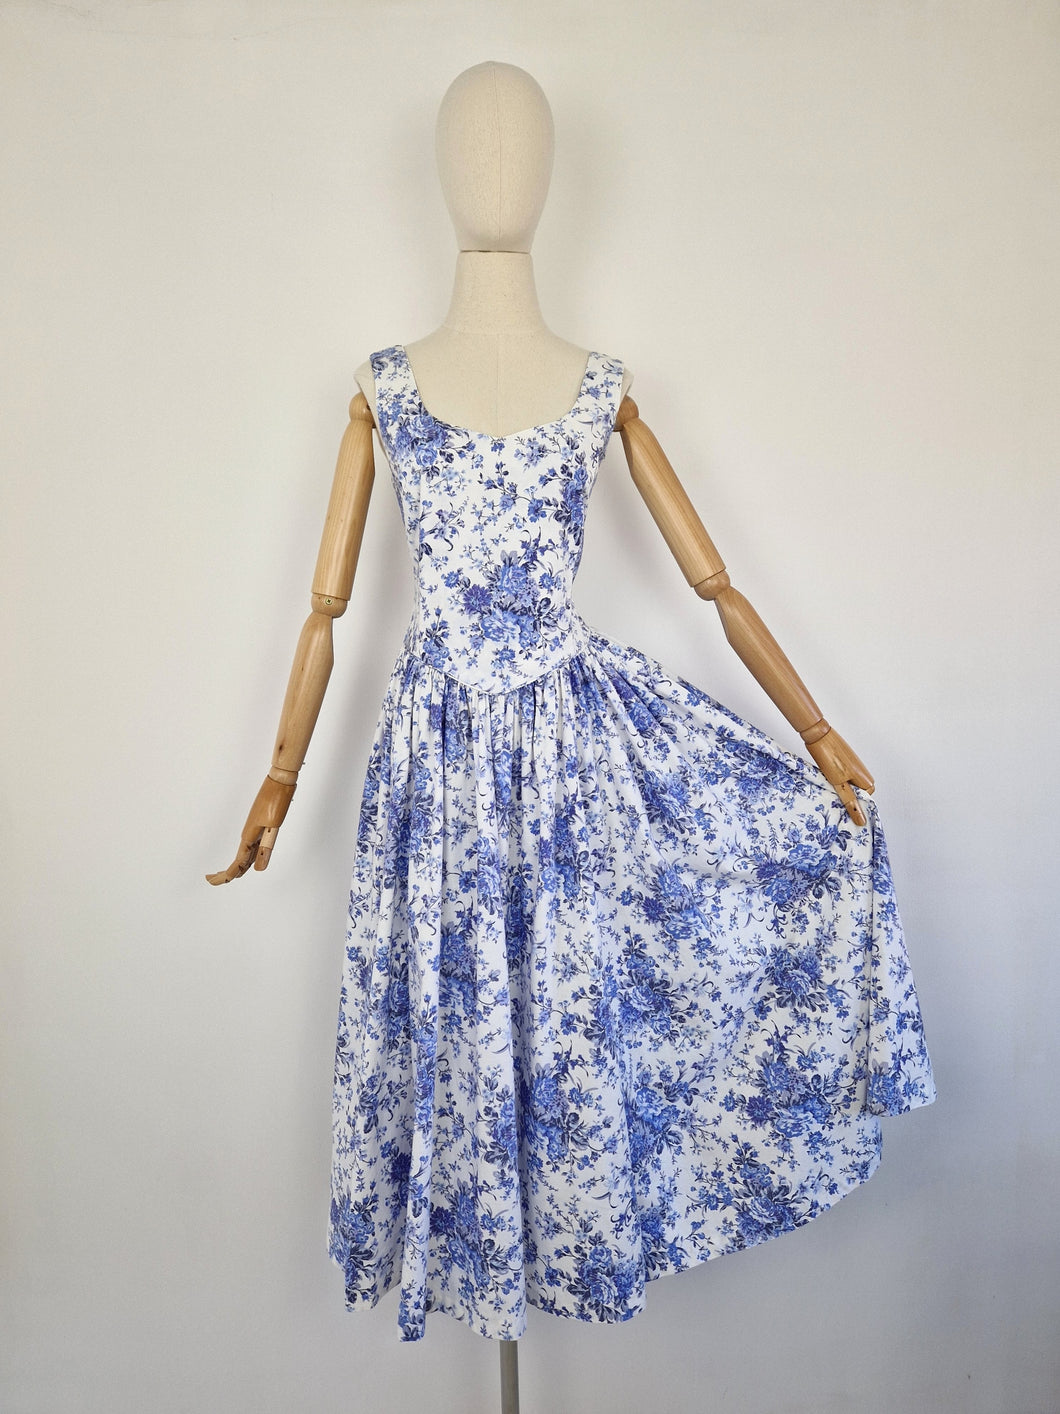 Vintage 80s/90s Laura Ashley blue and white dress